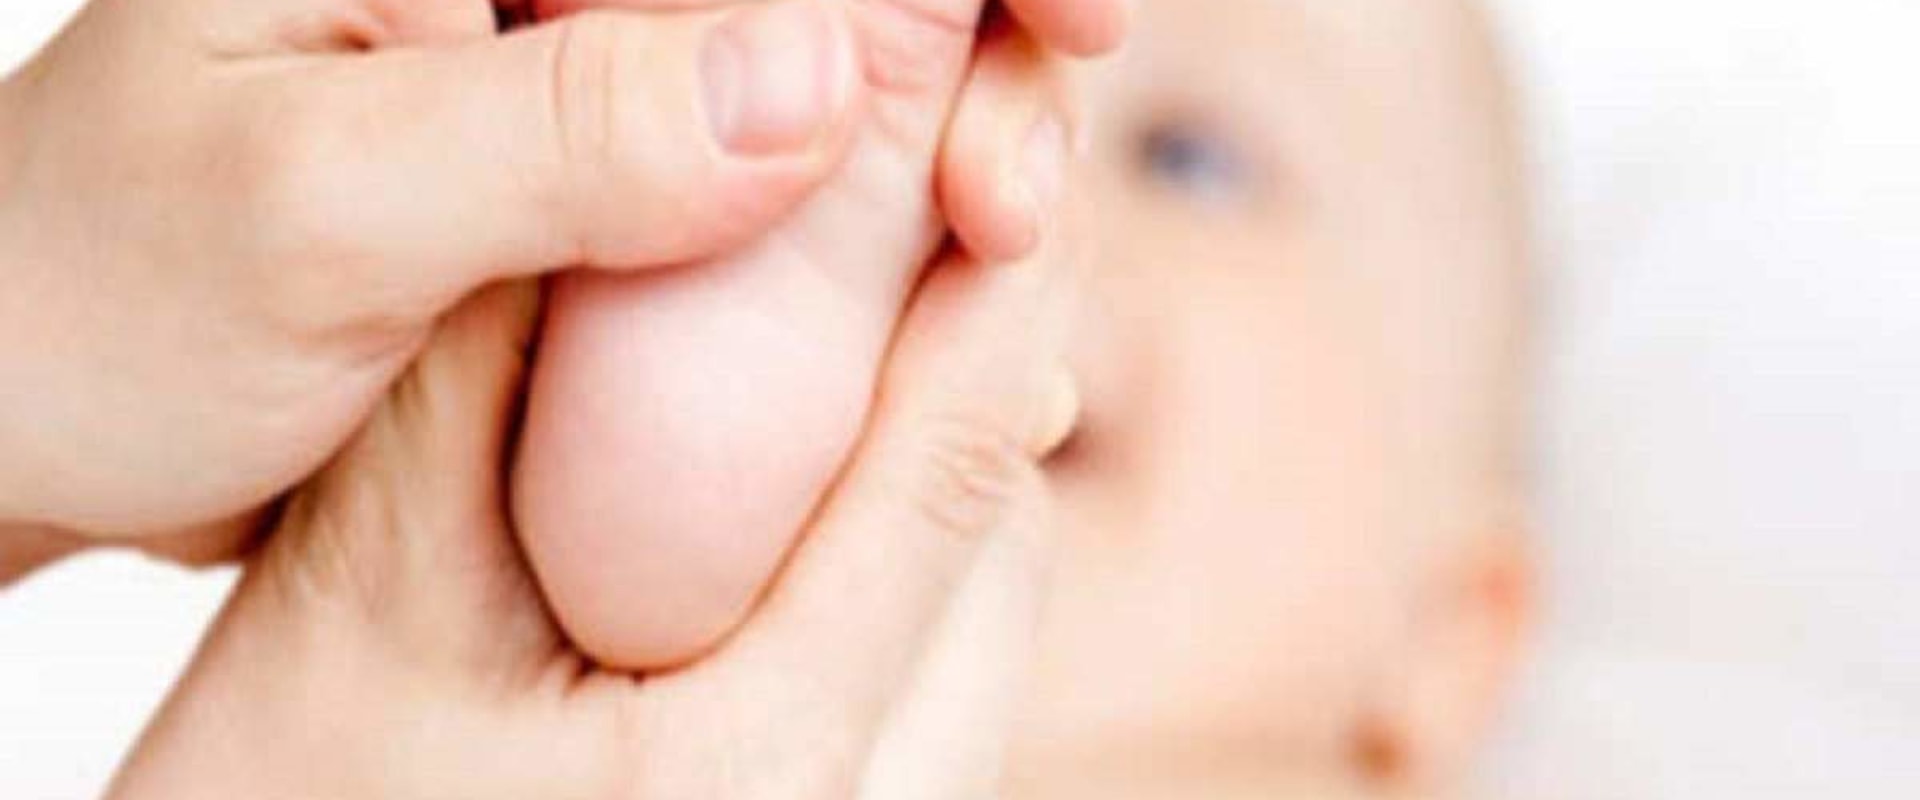 When to Use Massage Oil for Babies: An Expert's Guide